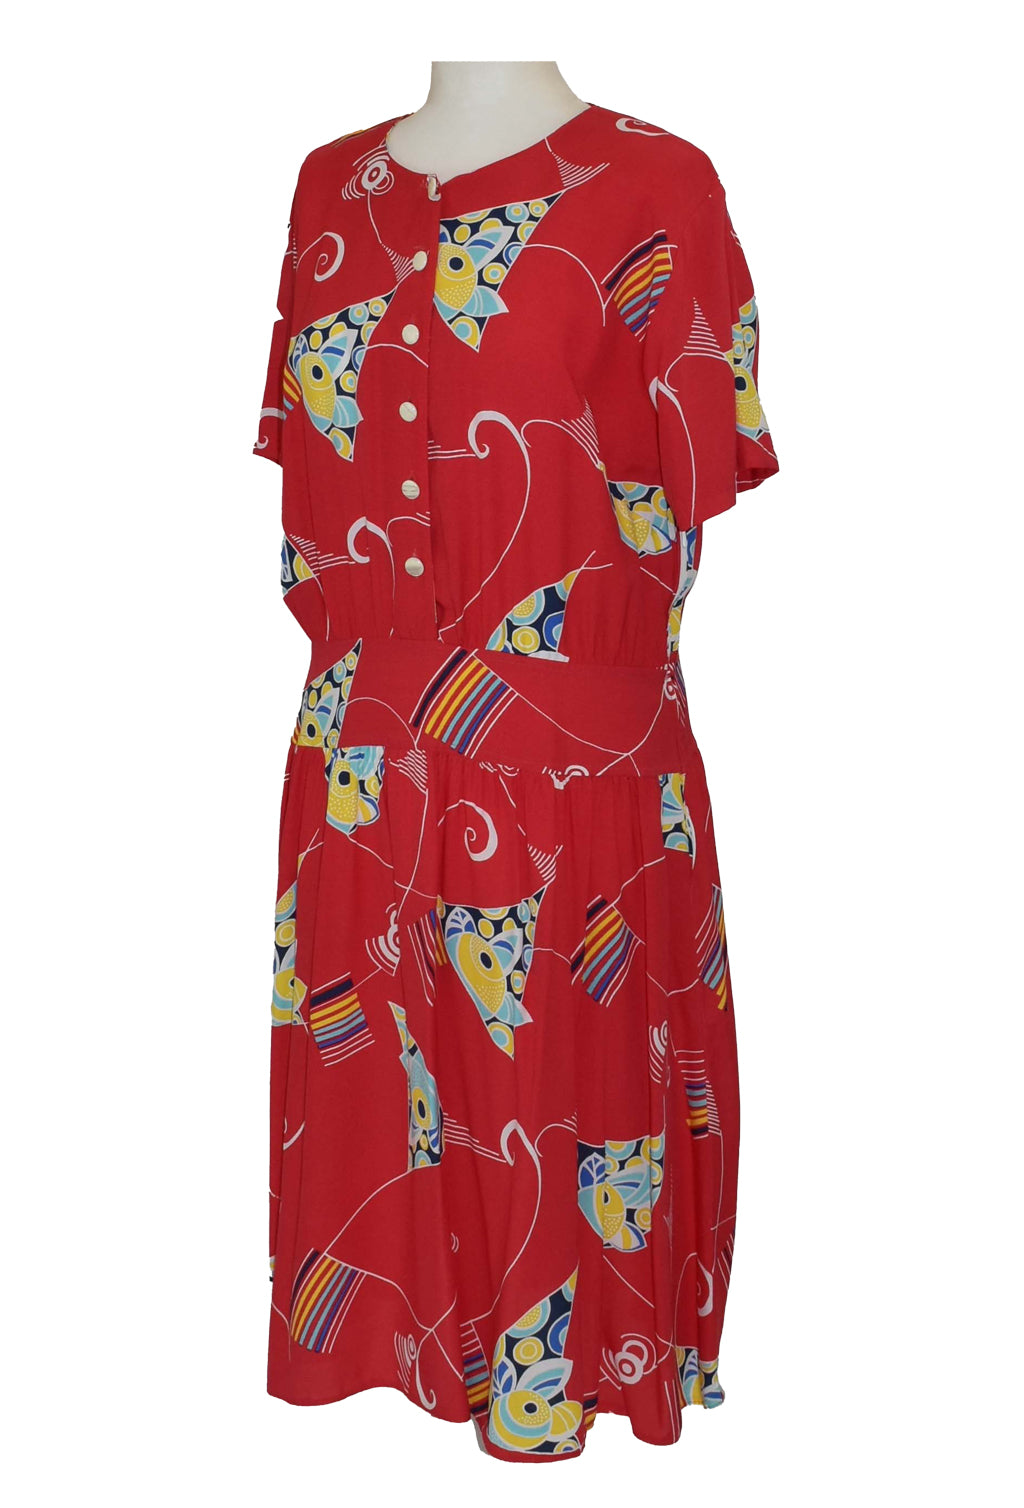 1980’s Abstract Fish Print Red Summer Dress | Vintage